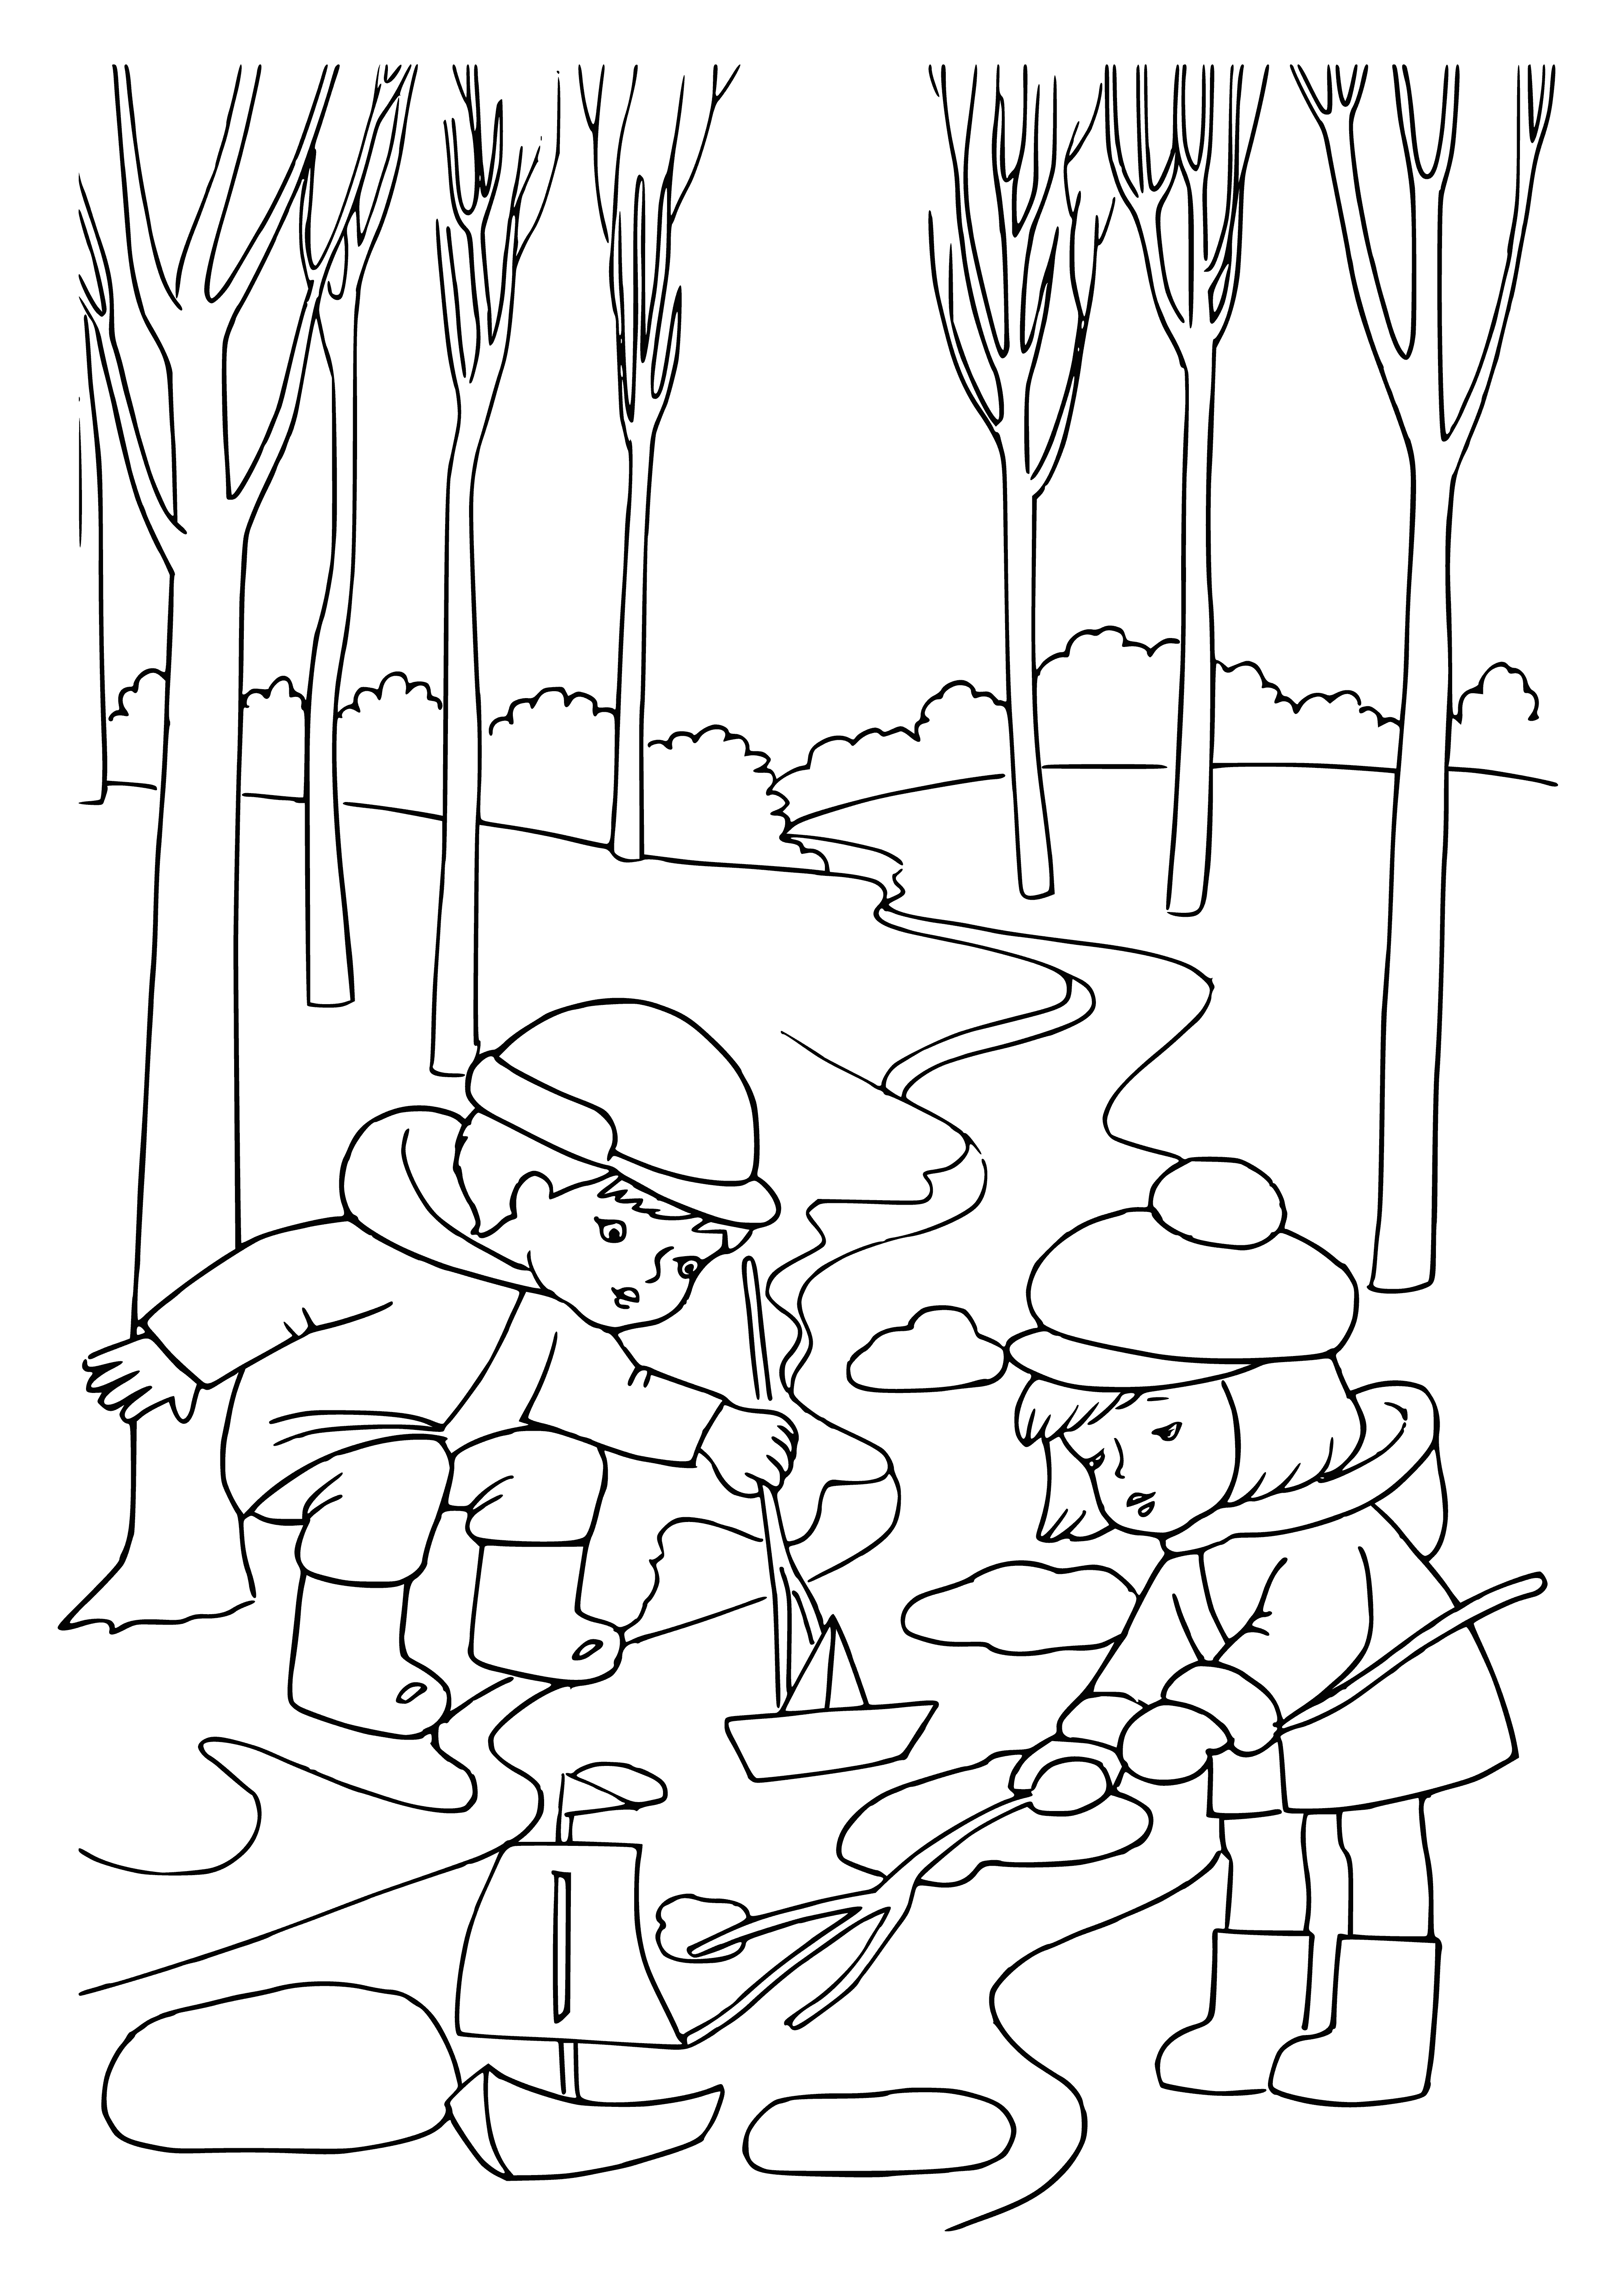 Brooks coloring page